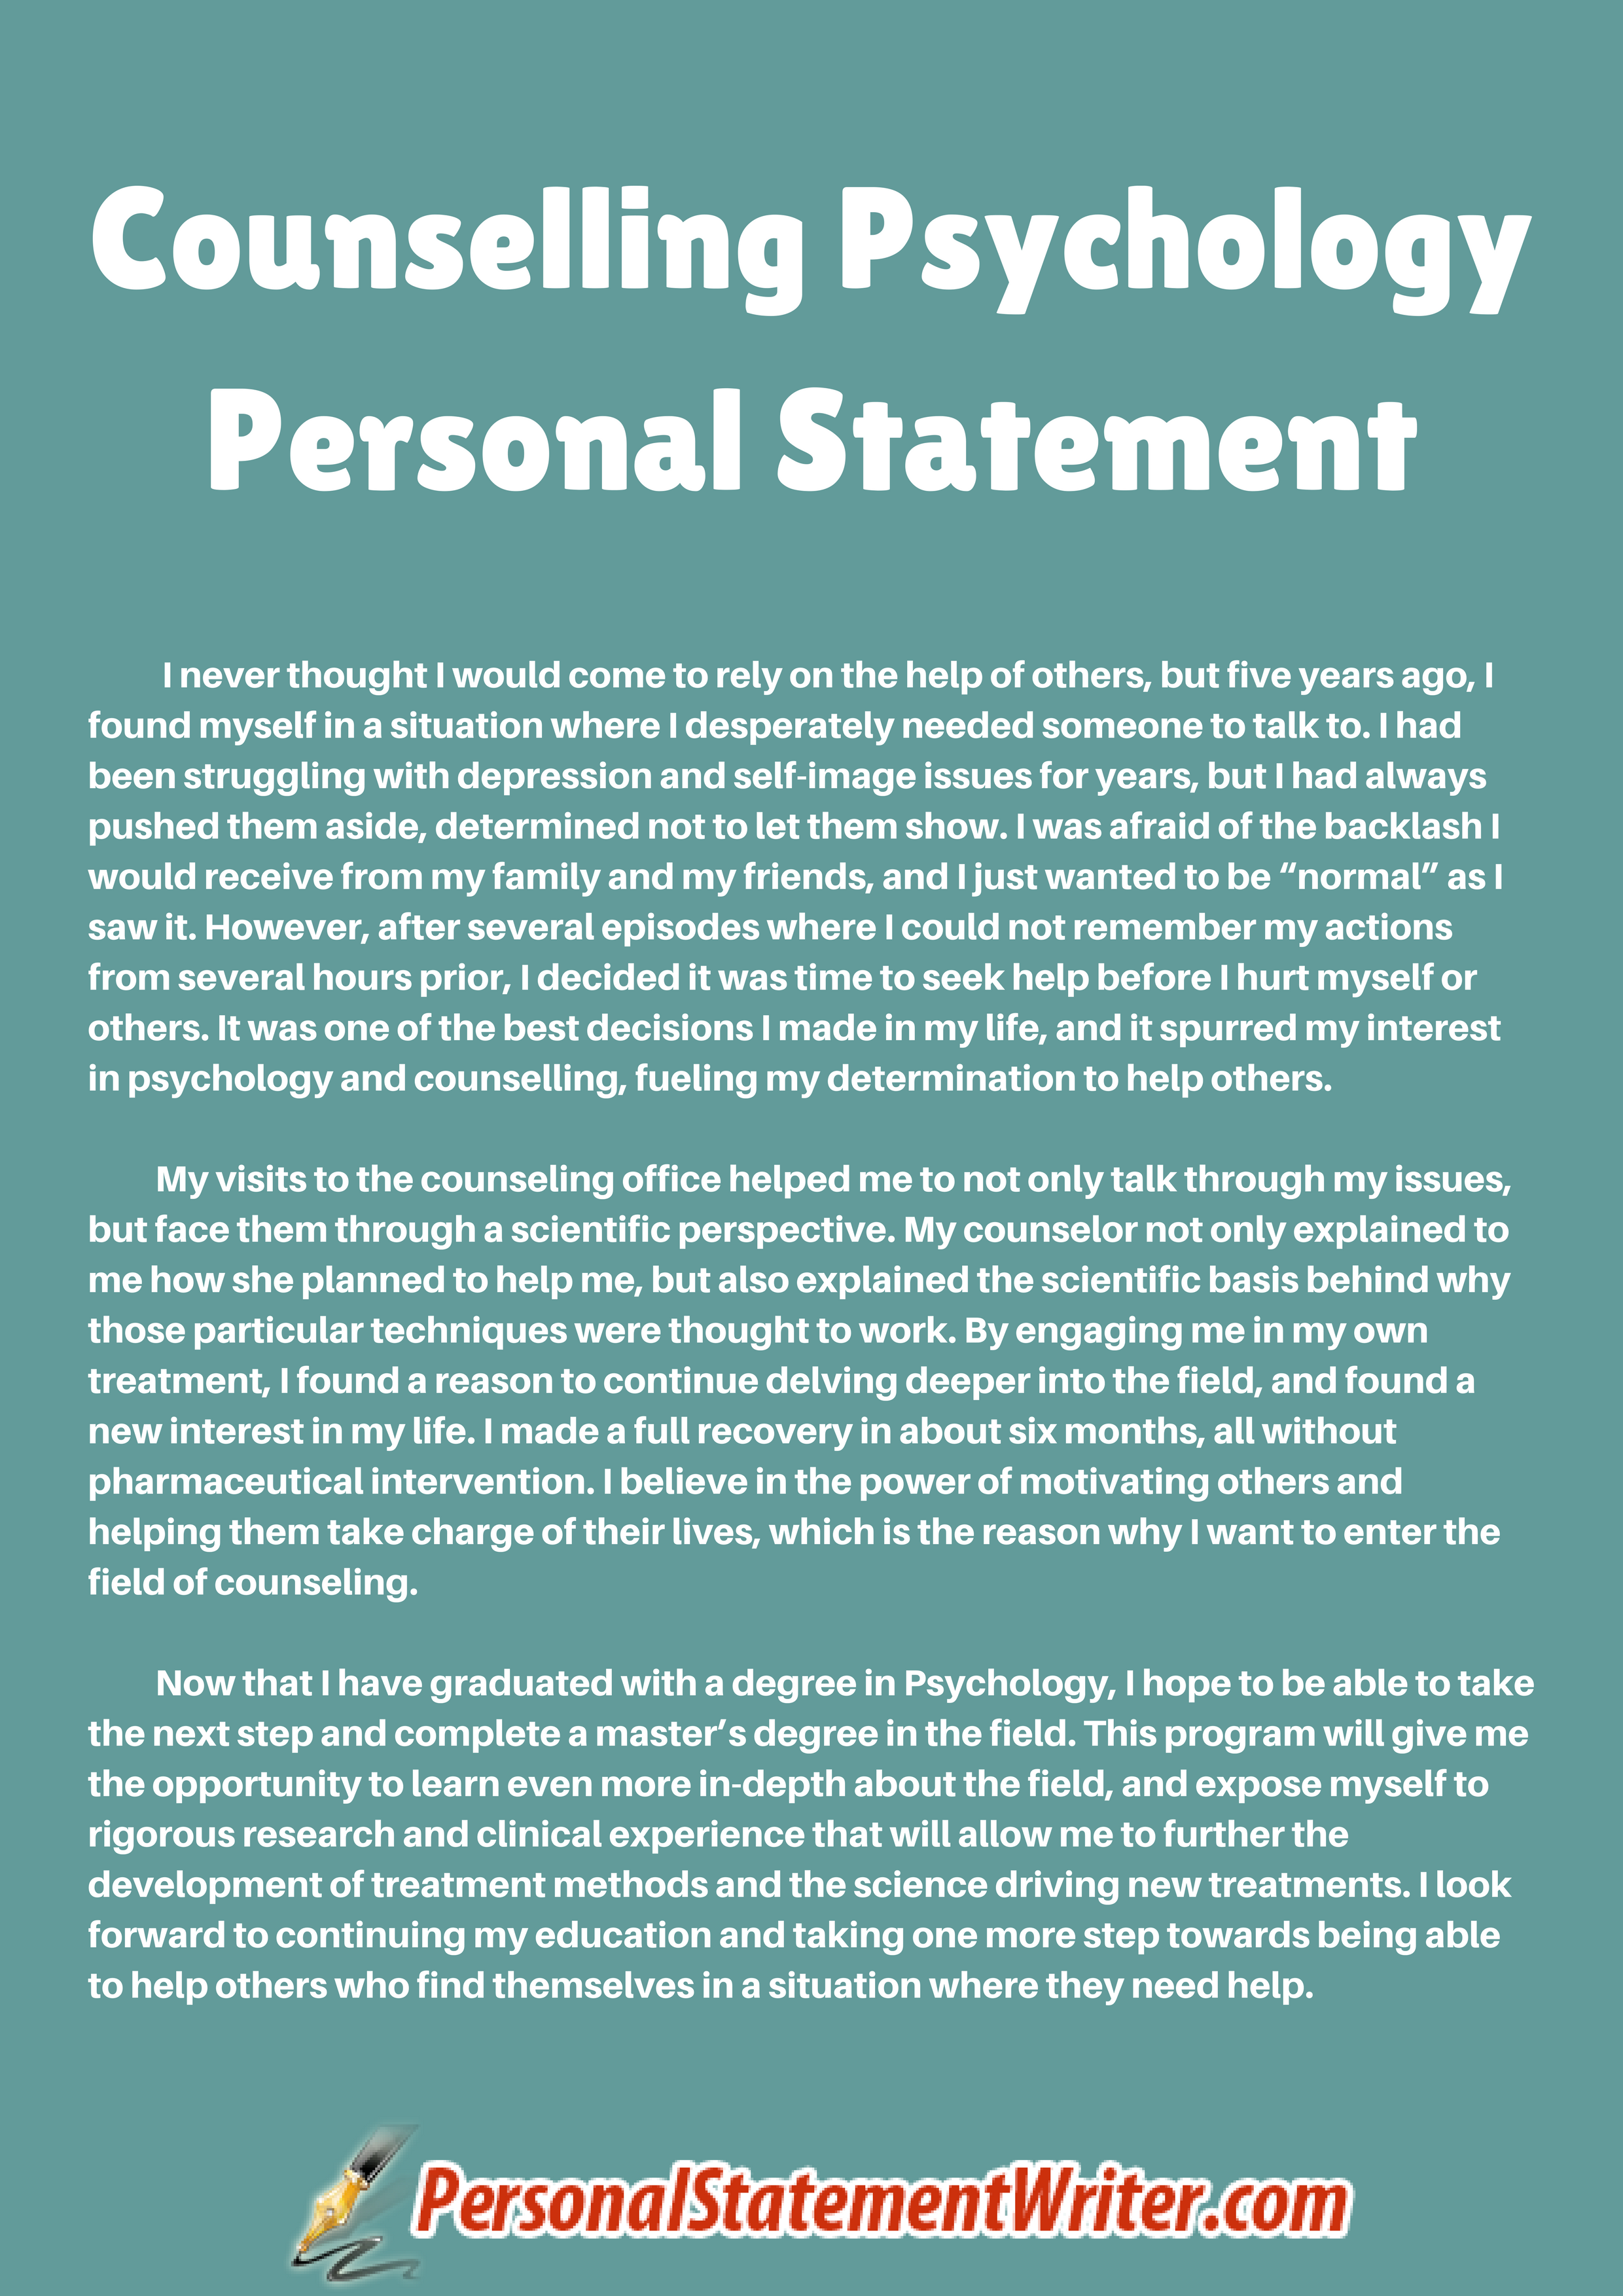 personal statement tips for psychology